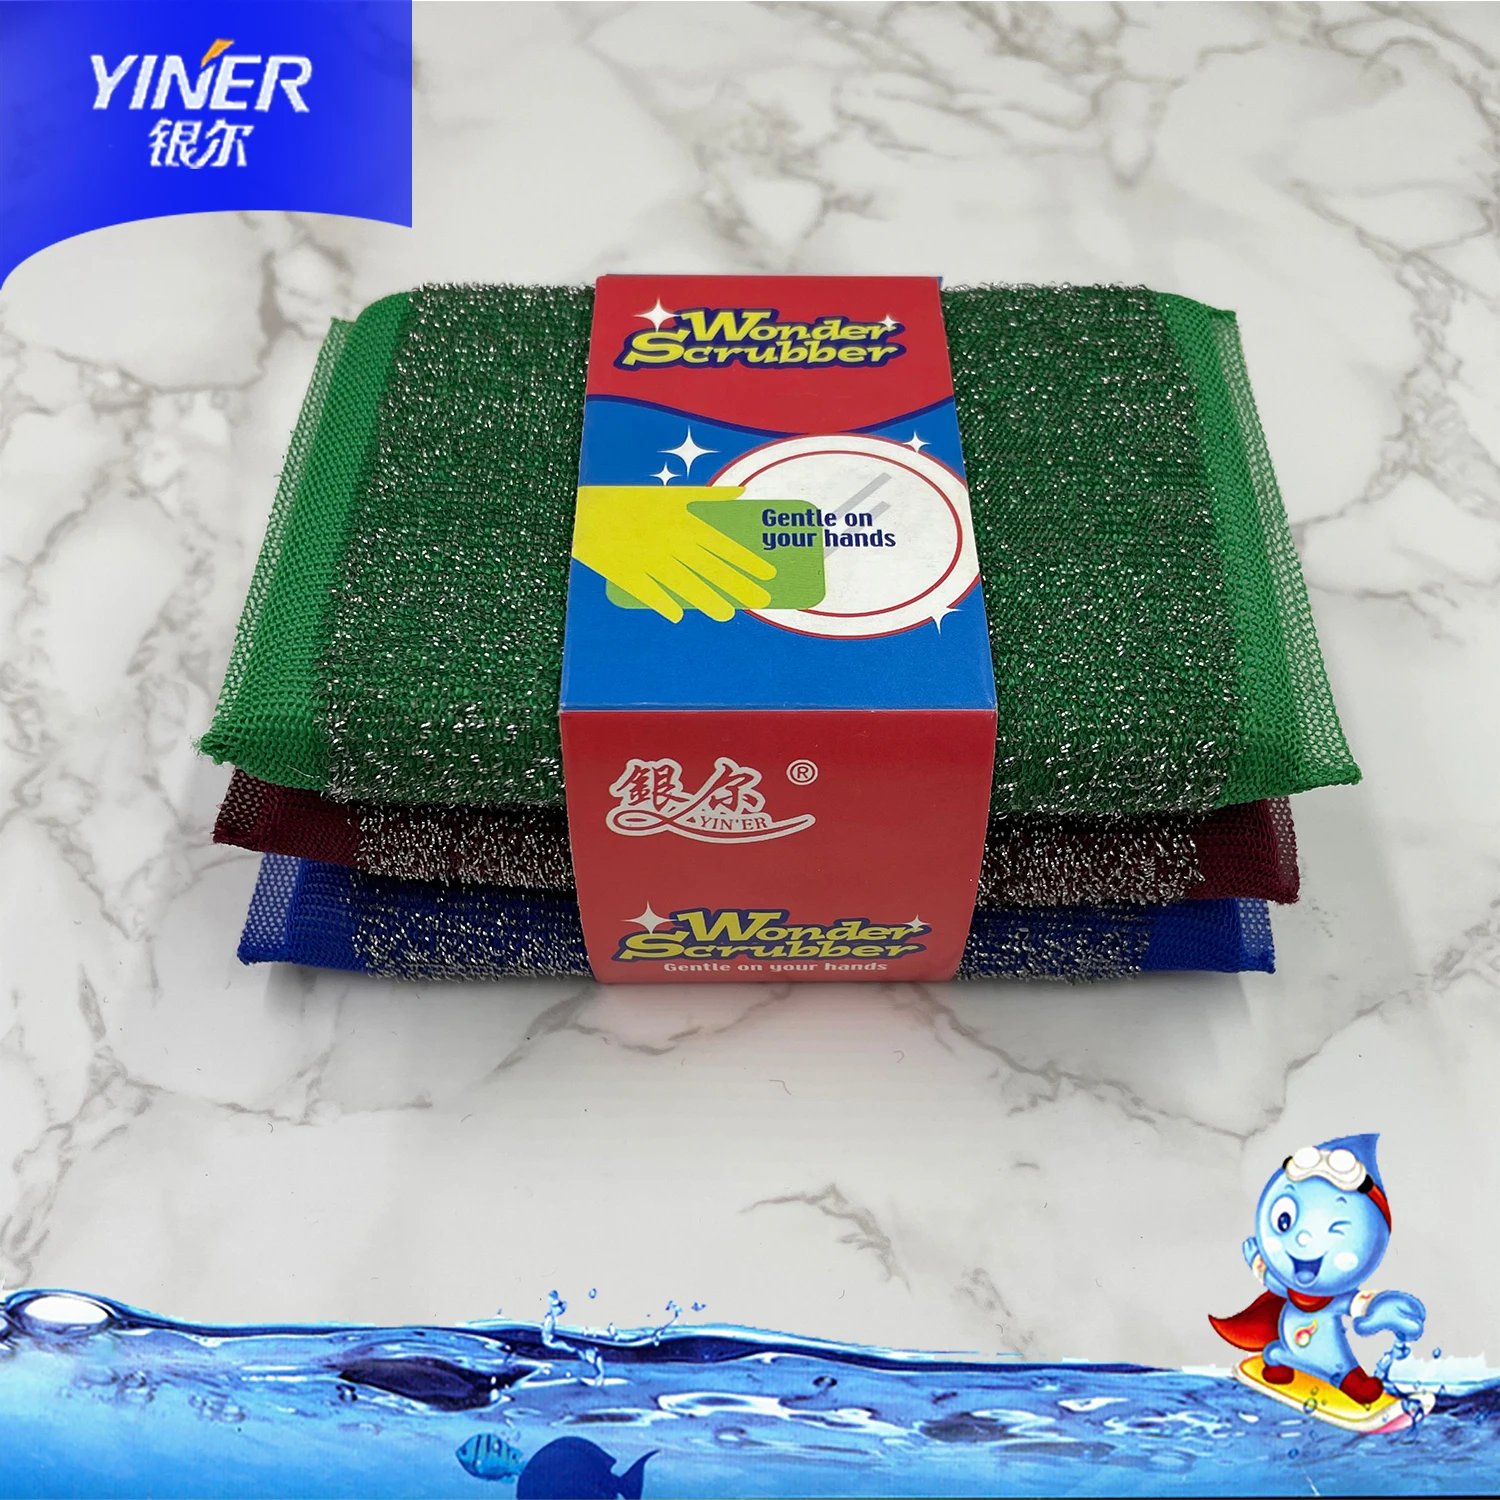 

Yiner Sponge Powerful Kitchen Cleaning 2 cm Thickness 3 Pcs Color Feature Eco Material Pad Steel Scourer Sponge Scrubber, 3 colors